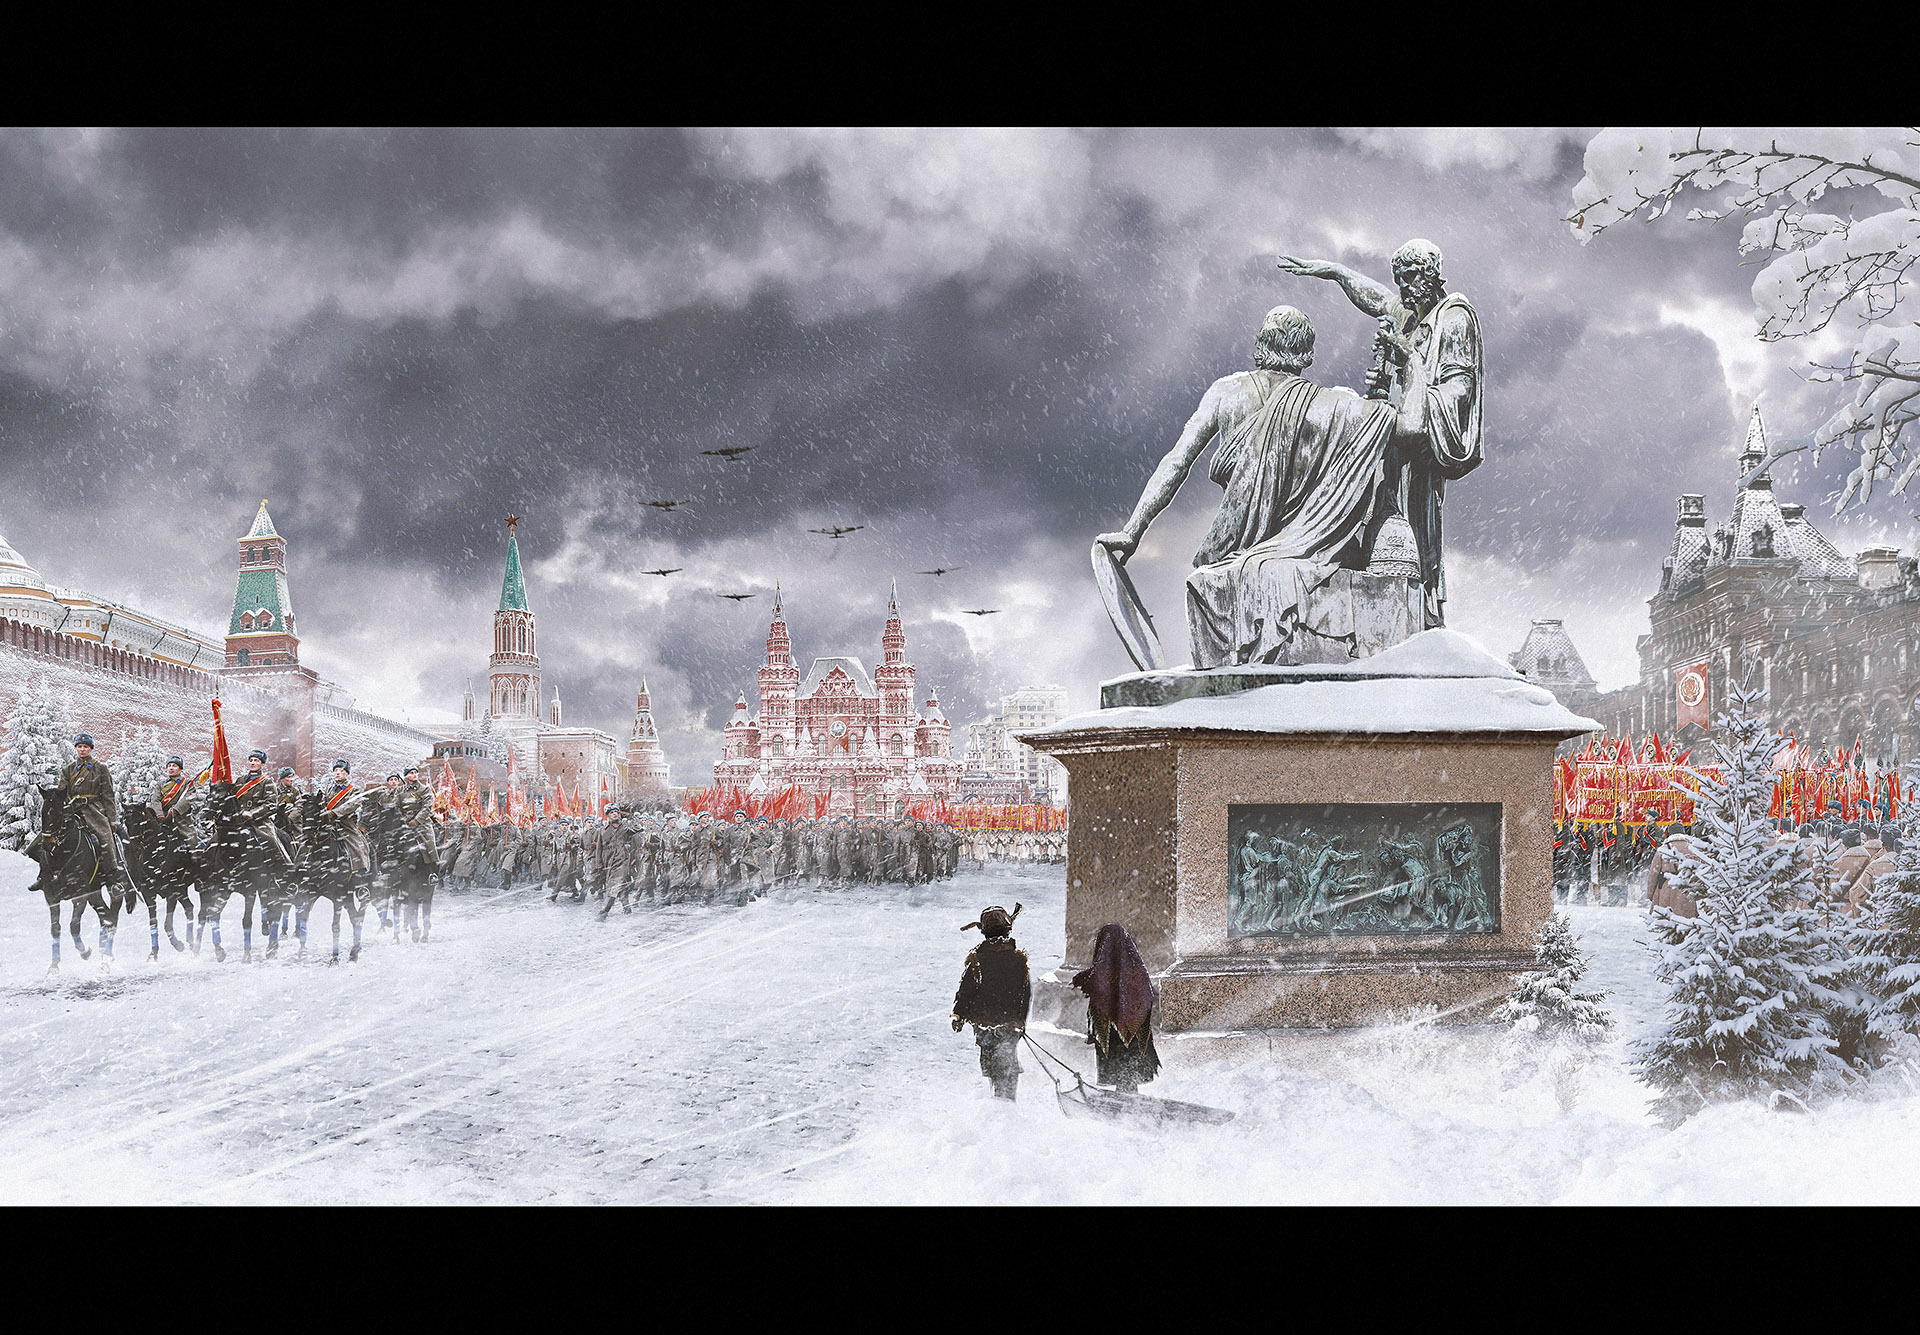 Looking for a father - My, Art, Creation, Hobby, Art, Photoshop, Matte painting, Parade, Collage, 1941, Victory, The Great Patriotic War